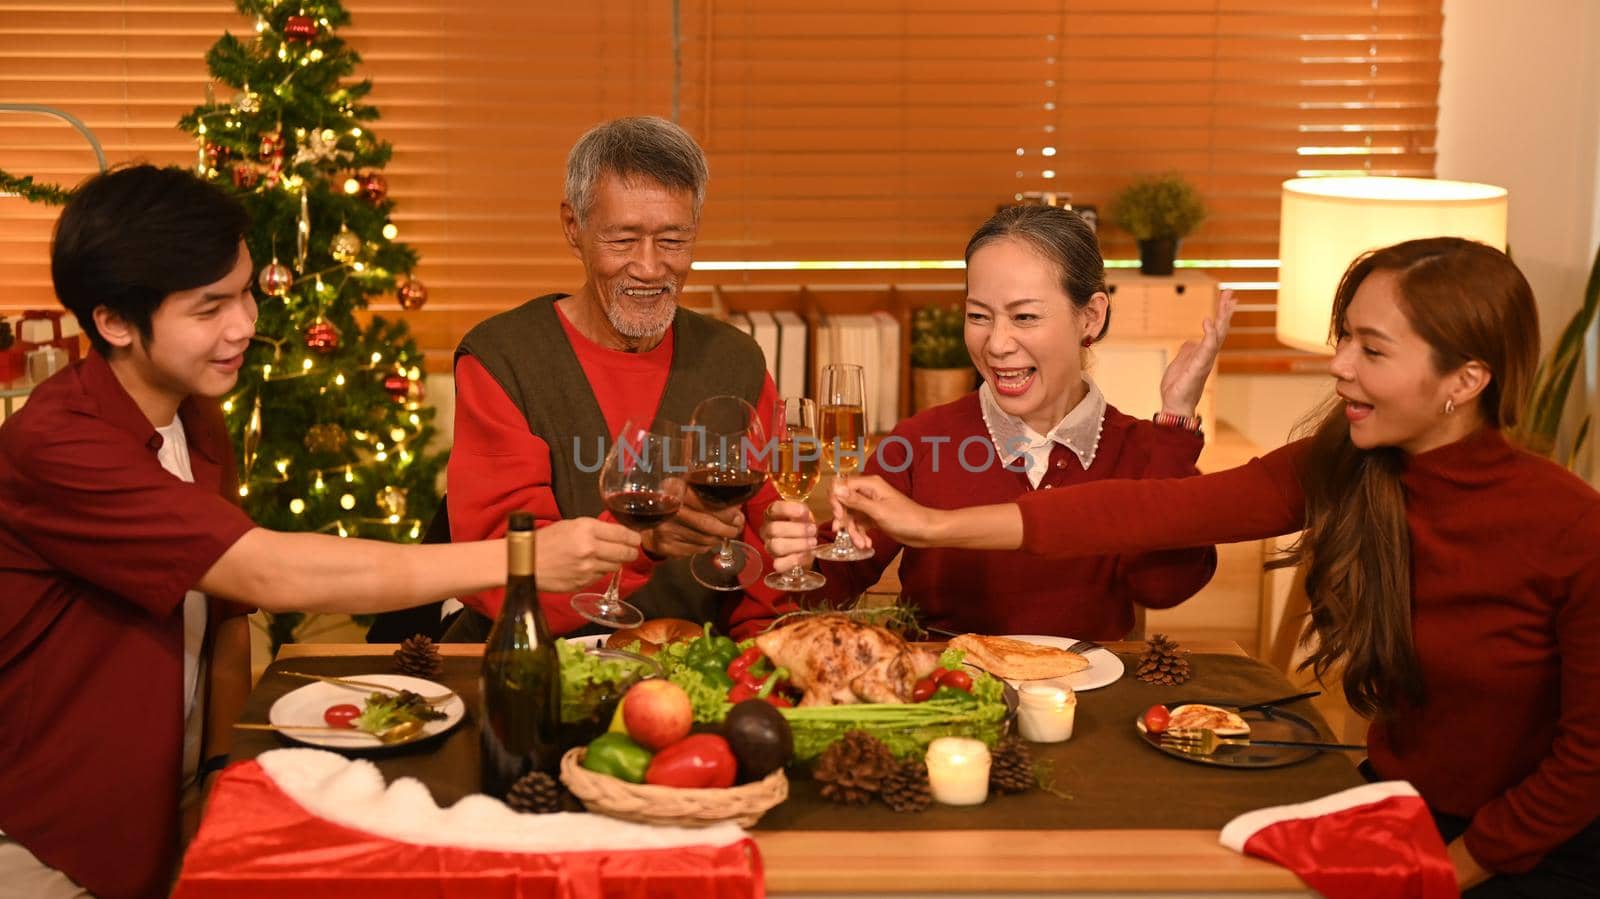 Image of happy family celebrating Christmas together at home lighted with soft lights and candles. Celebration, holidays and people concept.